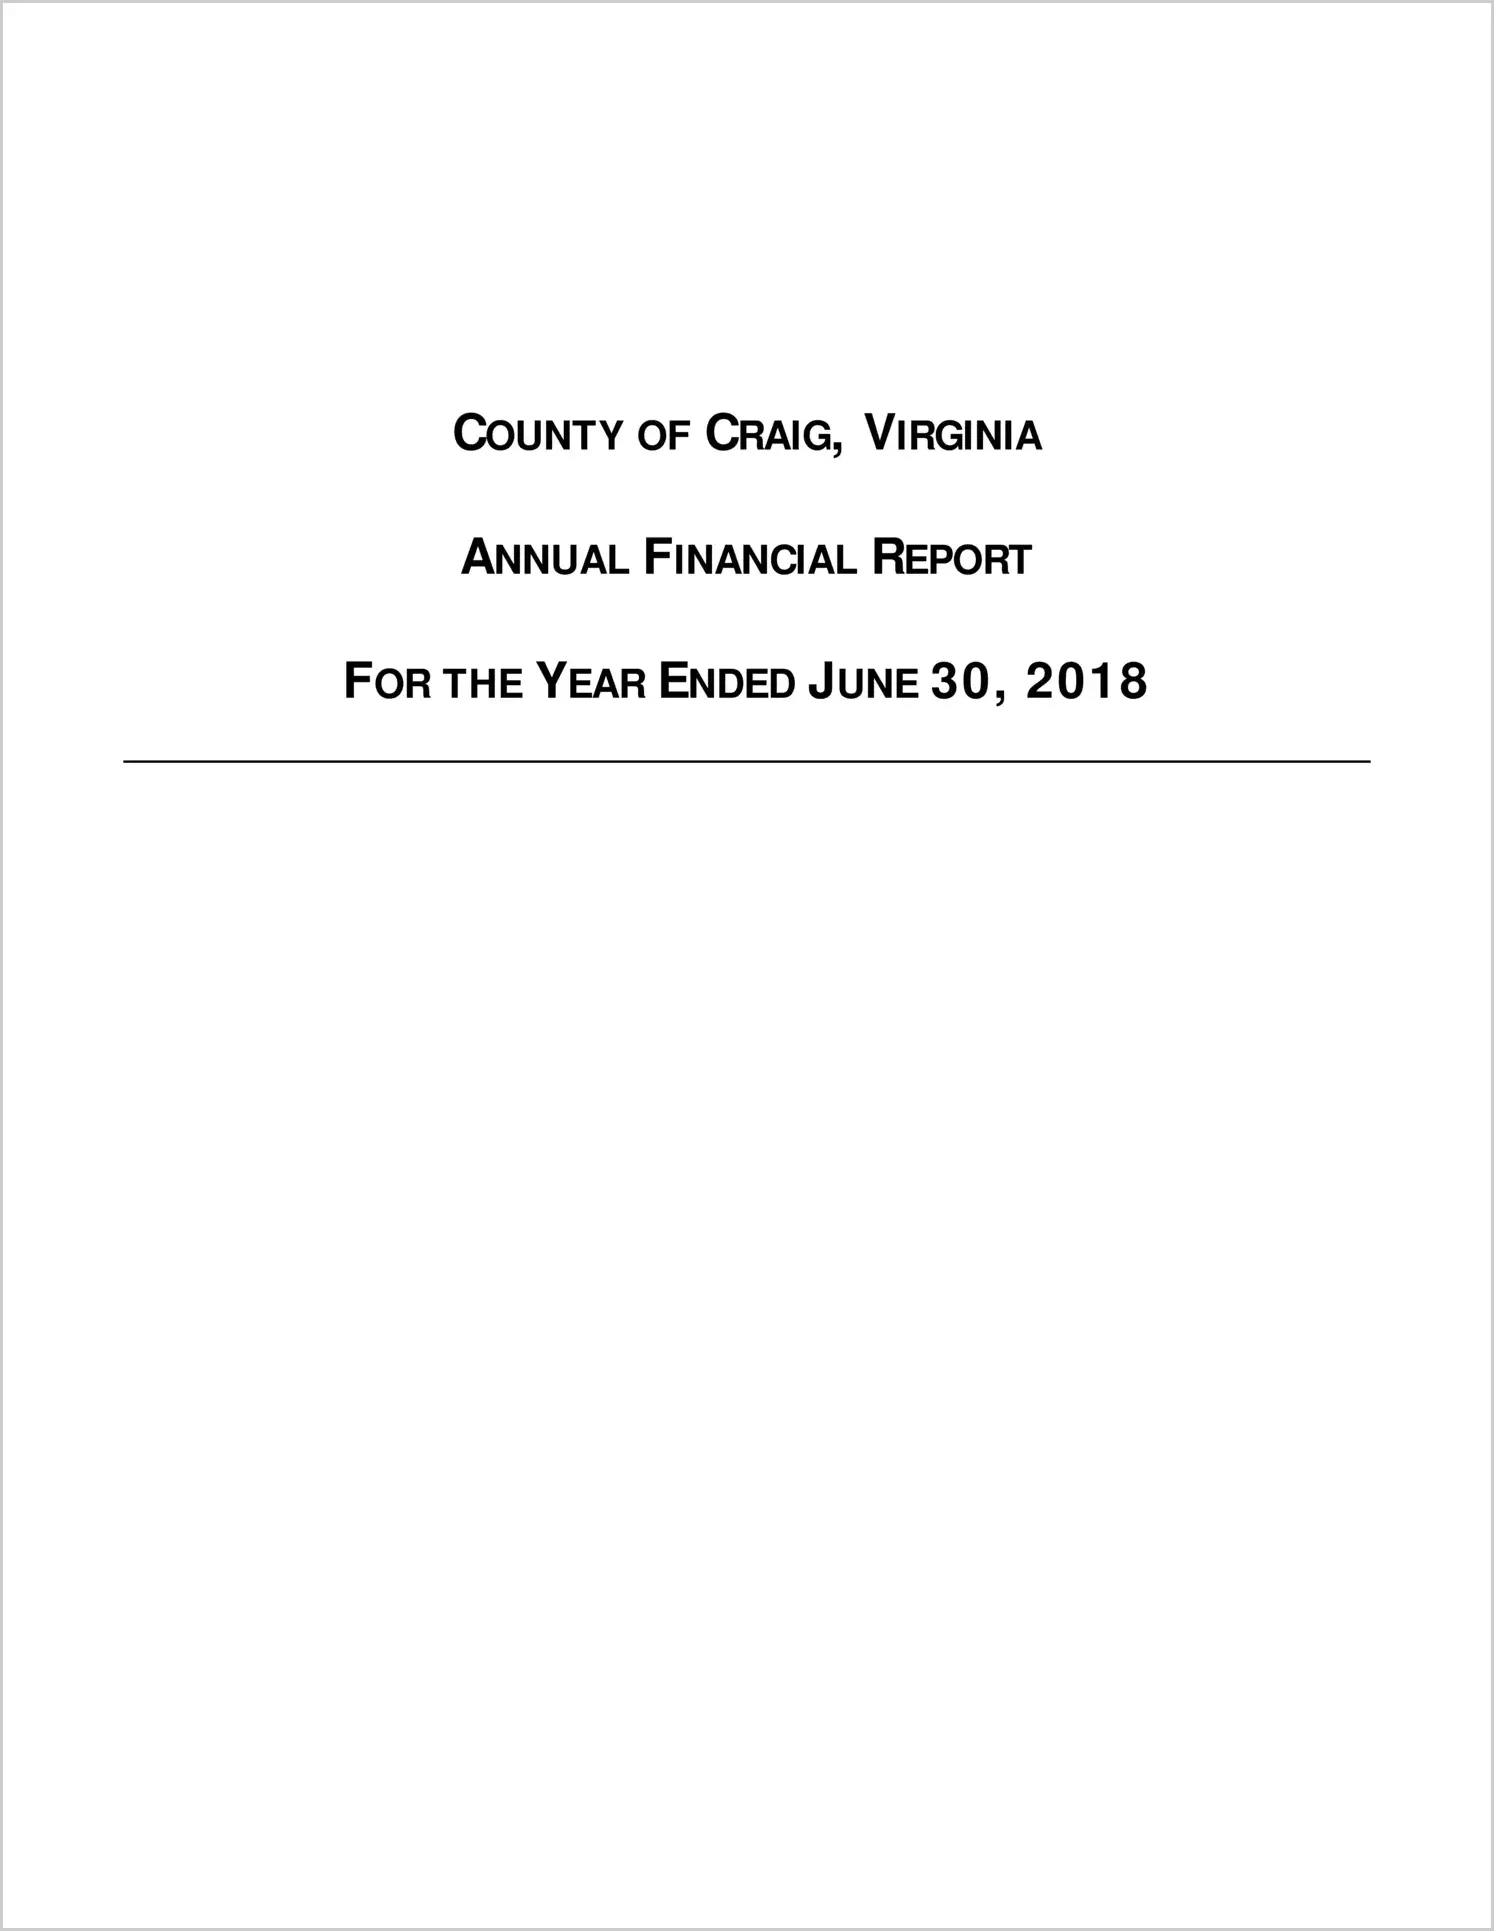 2018 Annual Financial Report for County of Craig